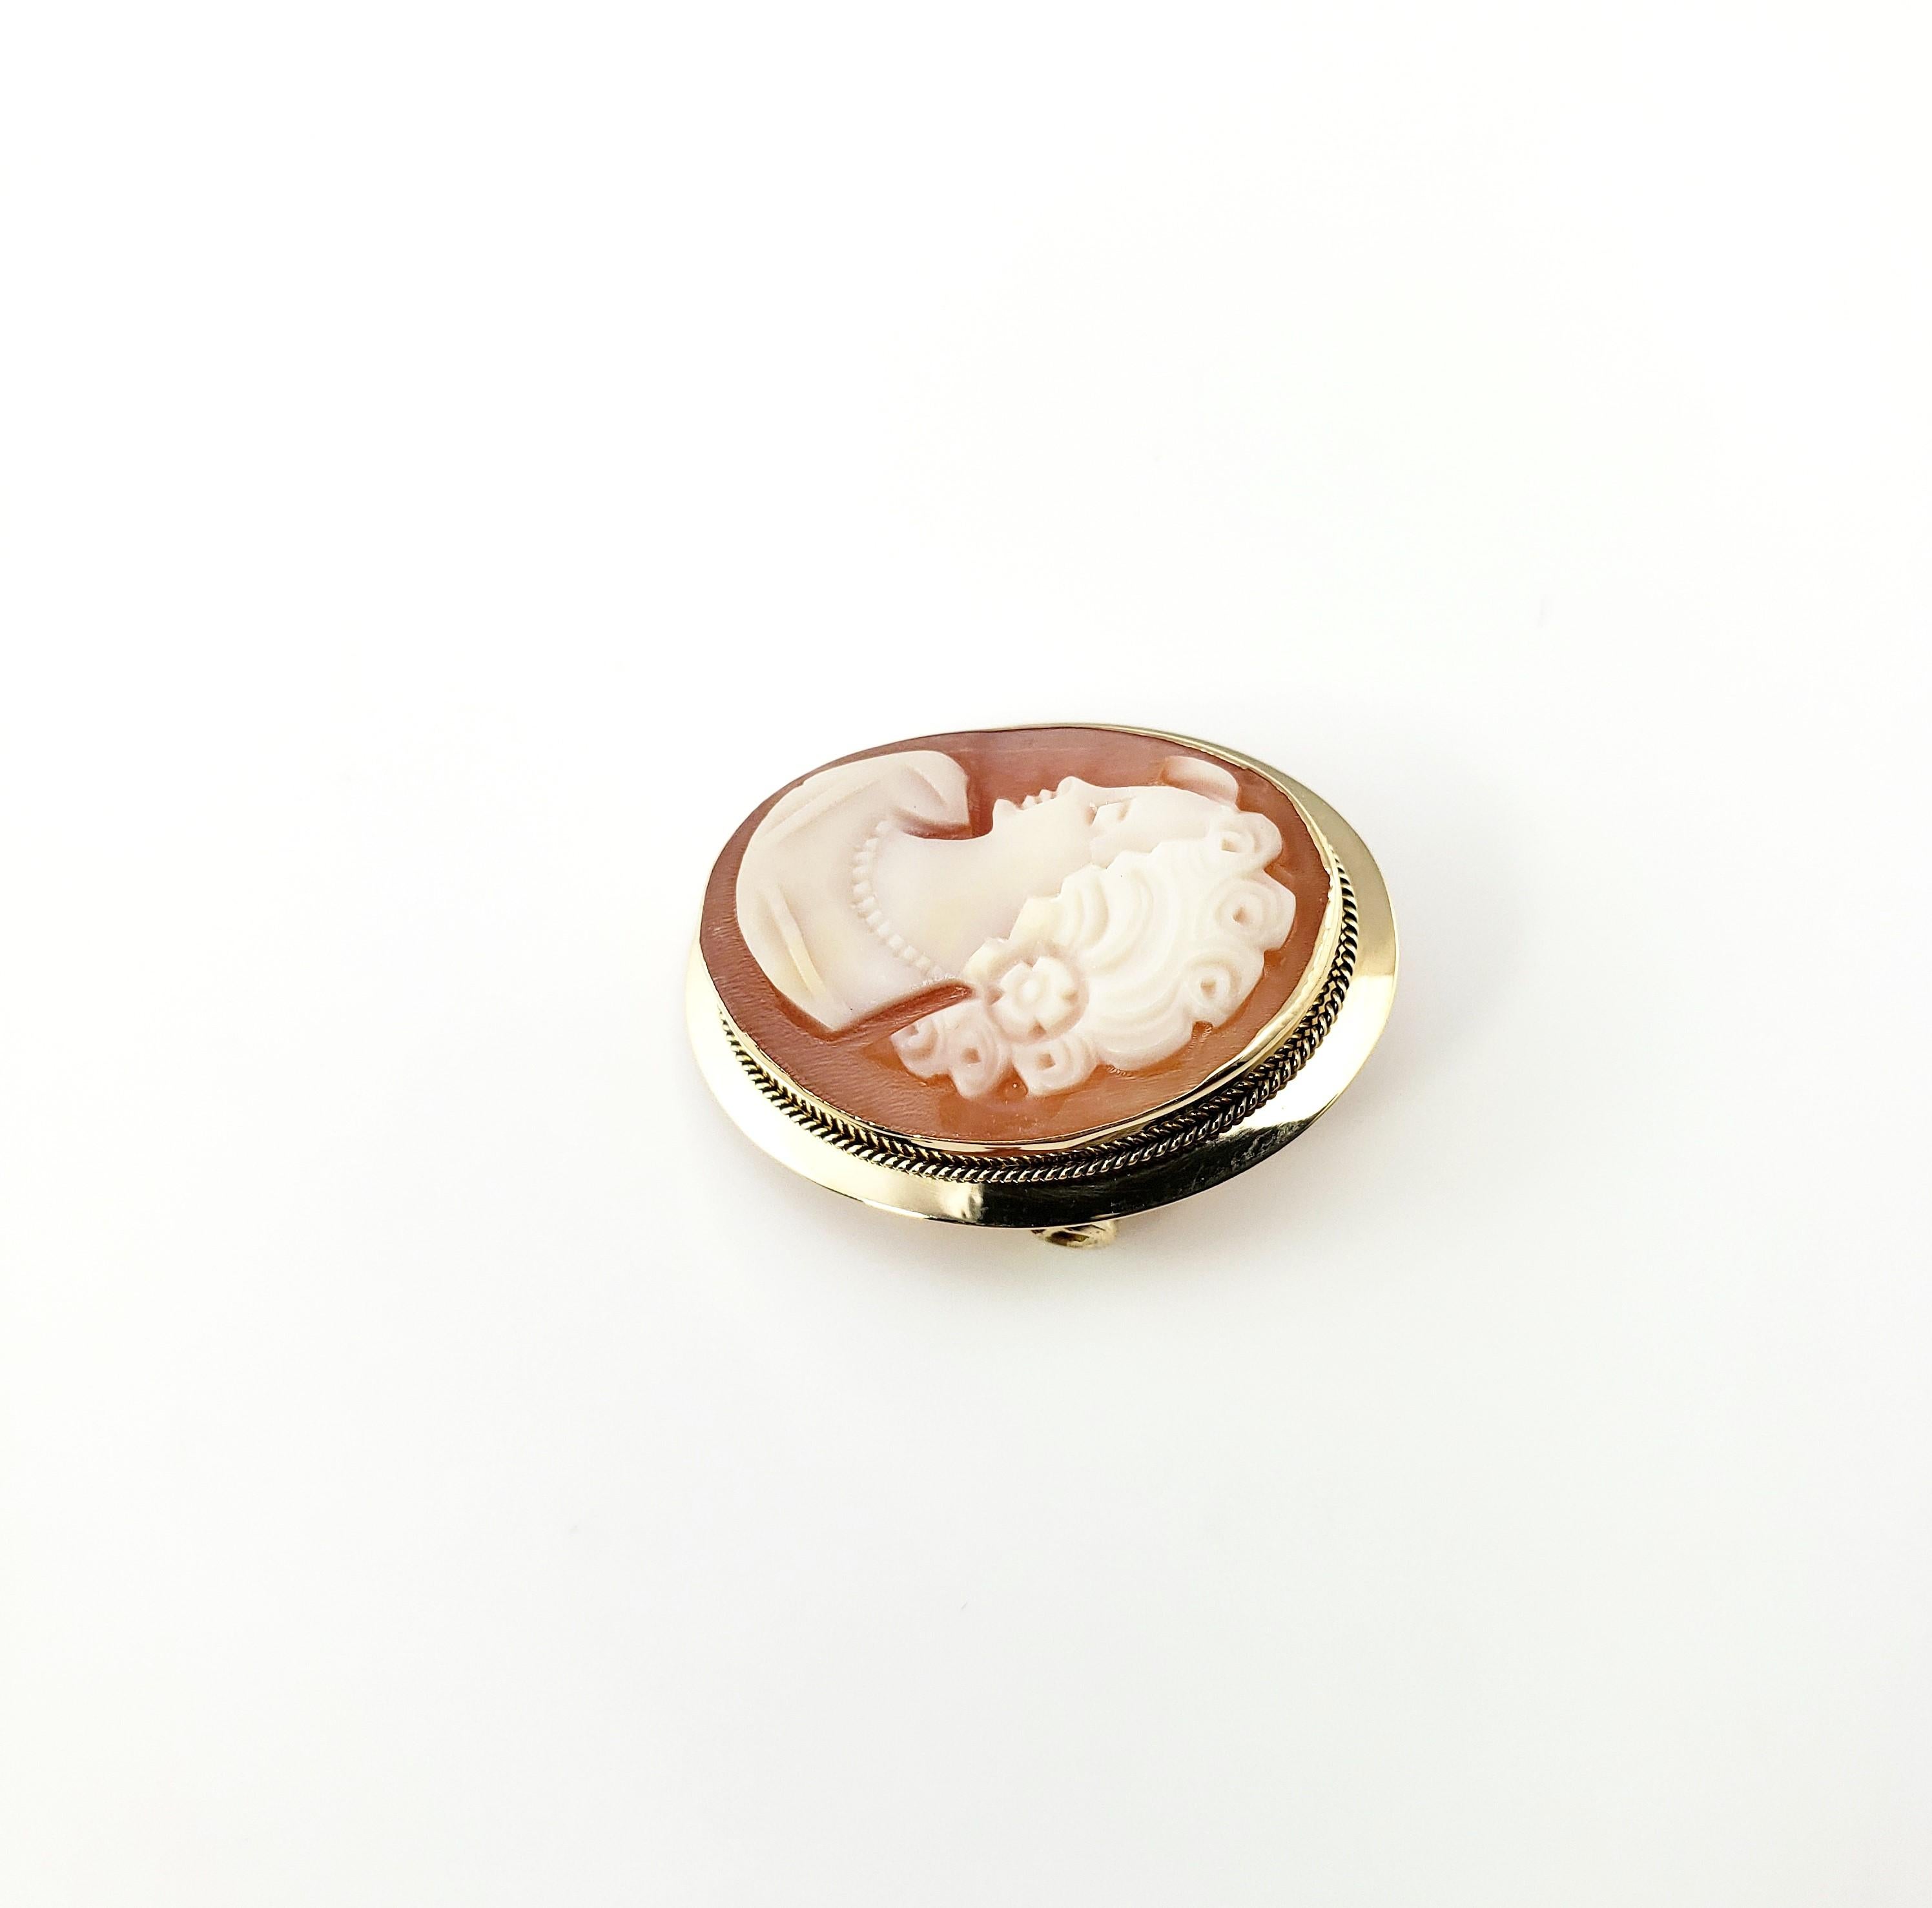 Vintage 14 Karat Yellow Gold Cameo Brooch / Pendant

This classic cameo features a lovely lady in profile framed in beautifully detailed 14K yellow gold. Can be worn as a brooch or a pendant.

Size: 24 mm x 18 mm

Weight: 1.6 dwt. / 2.6